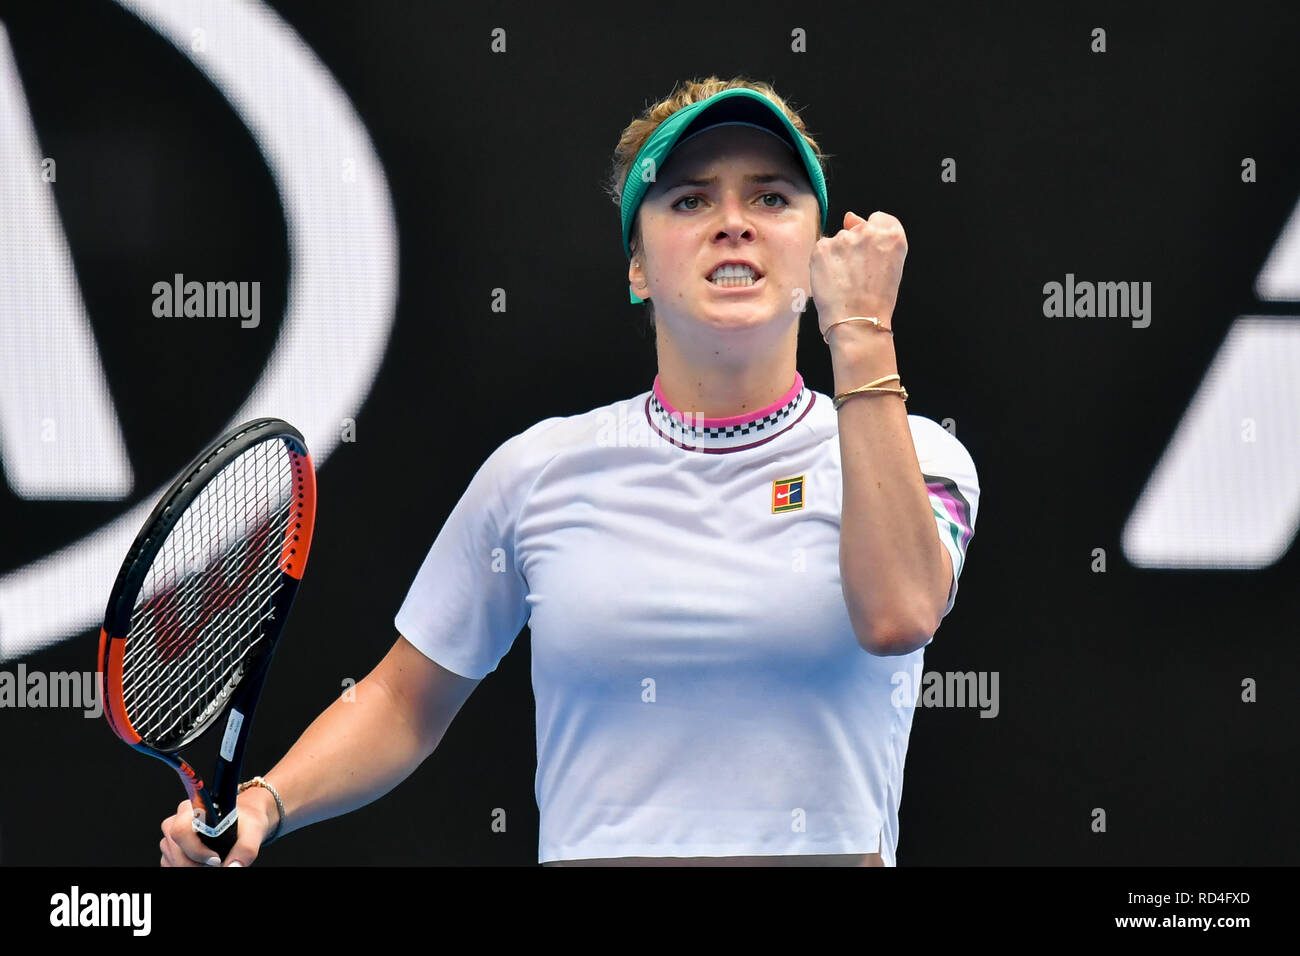 Melbourne, Australia. January 17, 2019: 6th seed Elina Svitolina of the  Ukraine in action in the second round match against Viktoria Kuzmova of  Slovakia on day four of the 2019 Australian Open